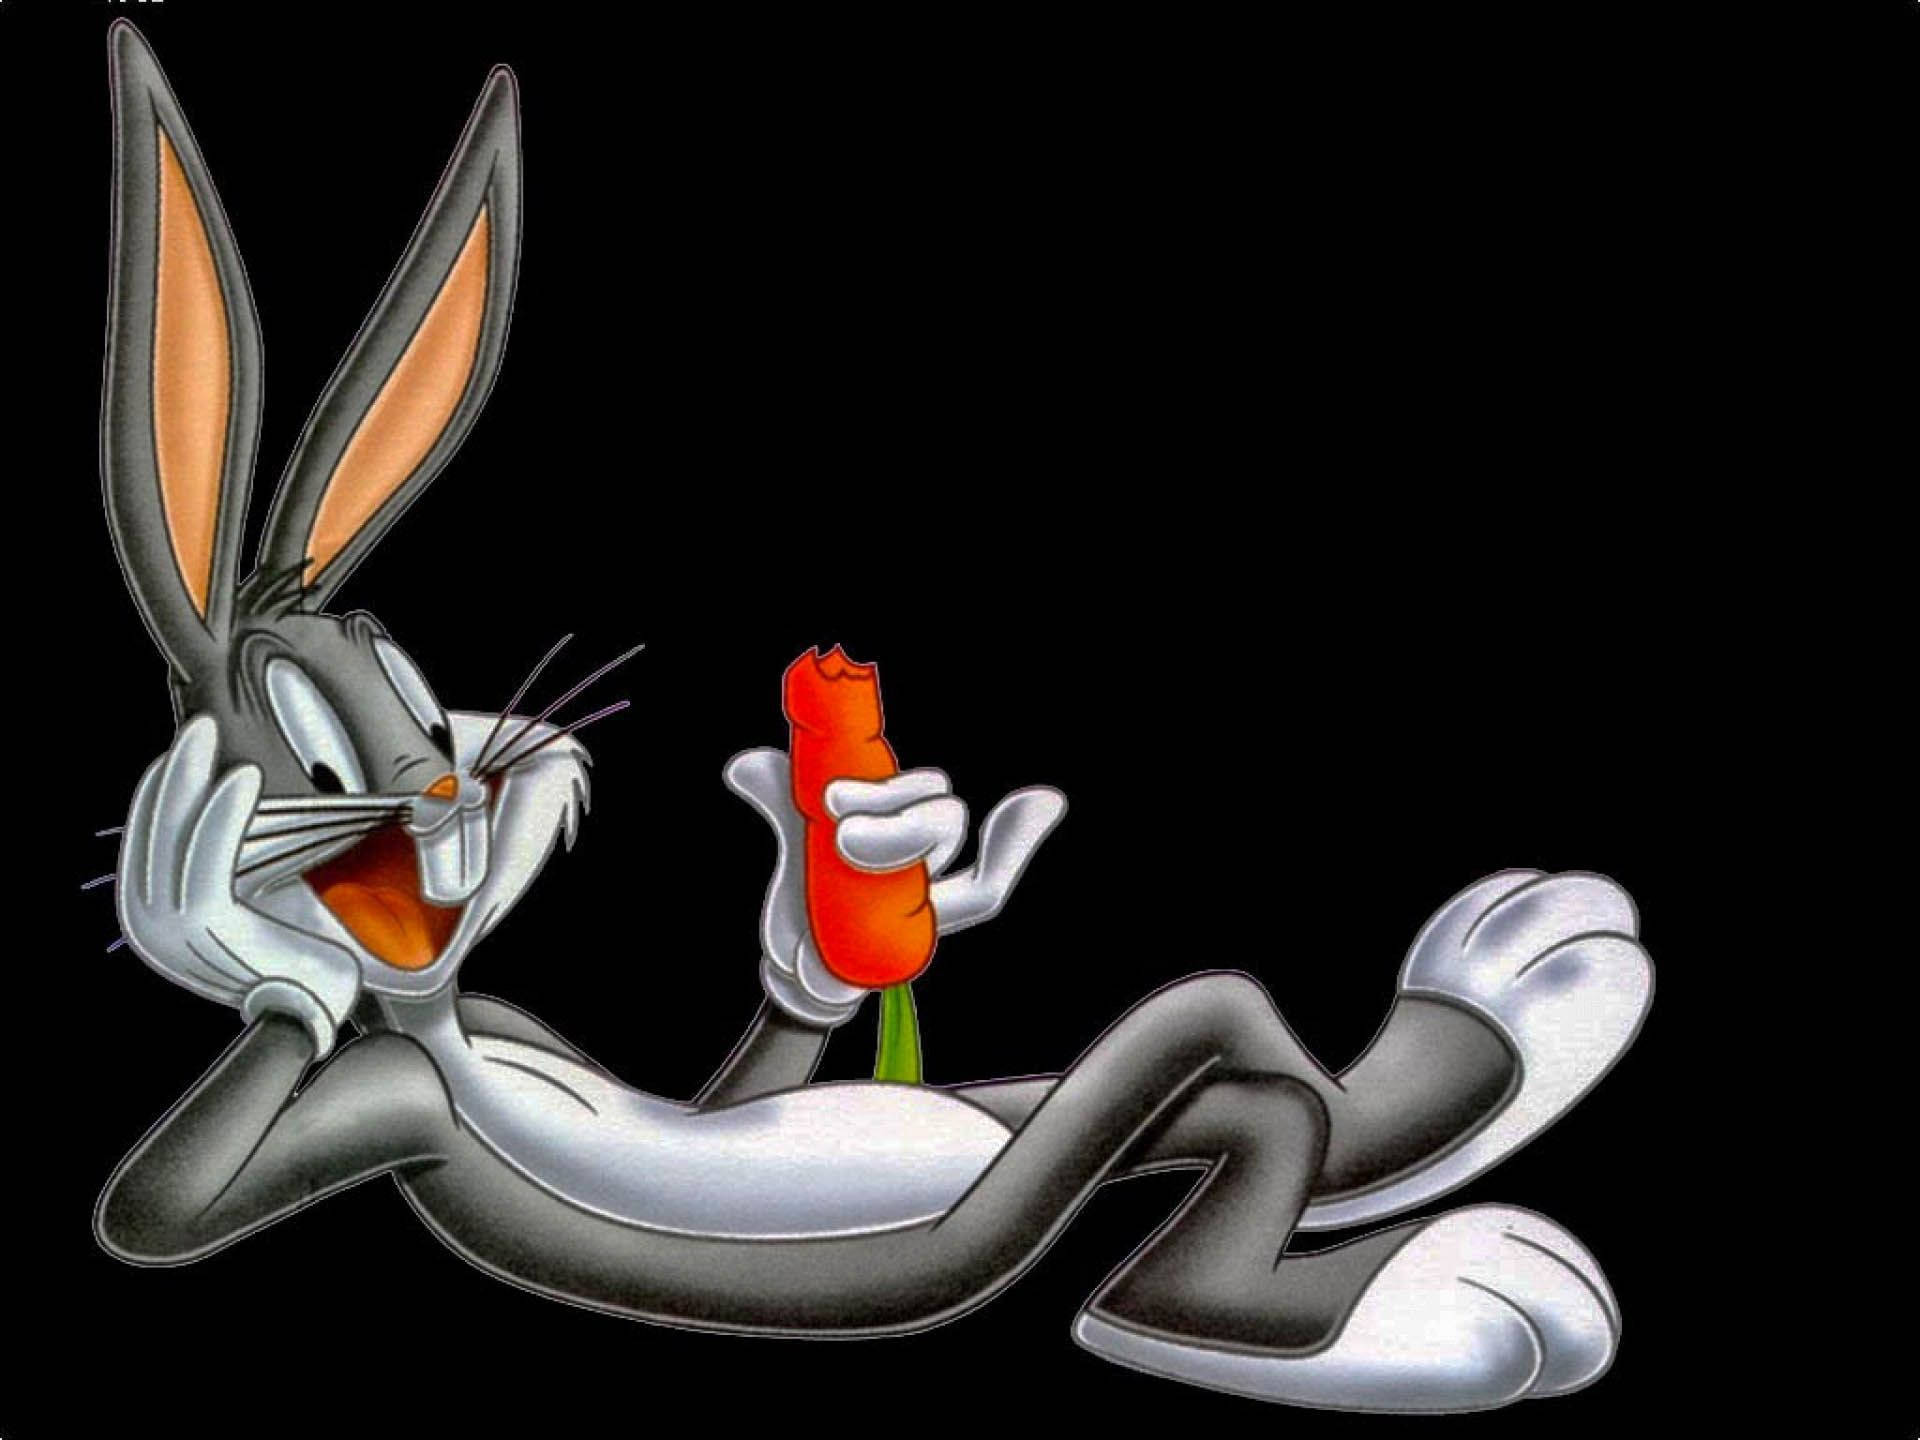 Top 999+ Bugs Bunny Wallpaper Full HD, 4K✅Free to Use